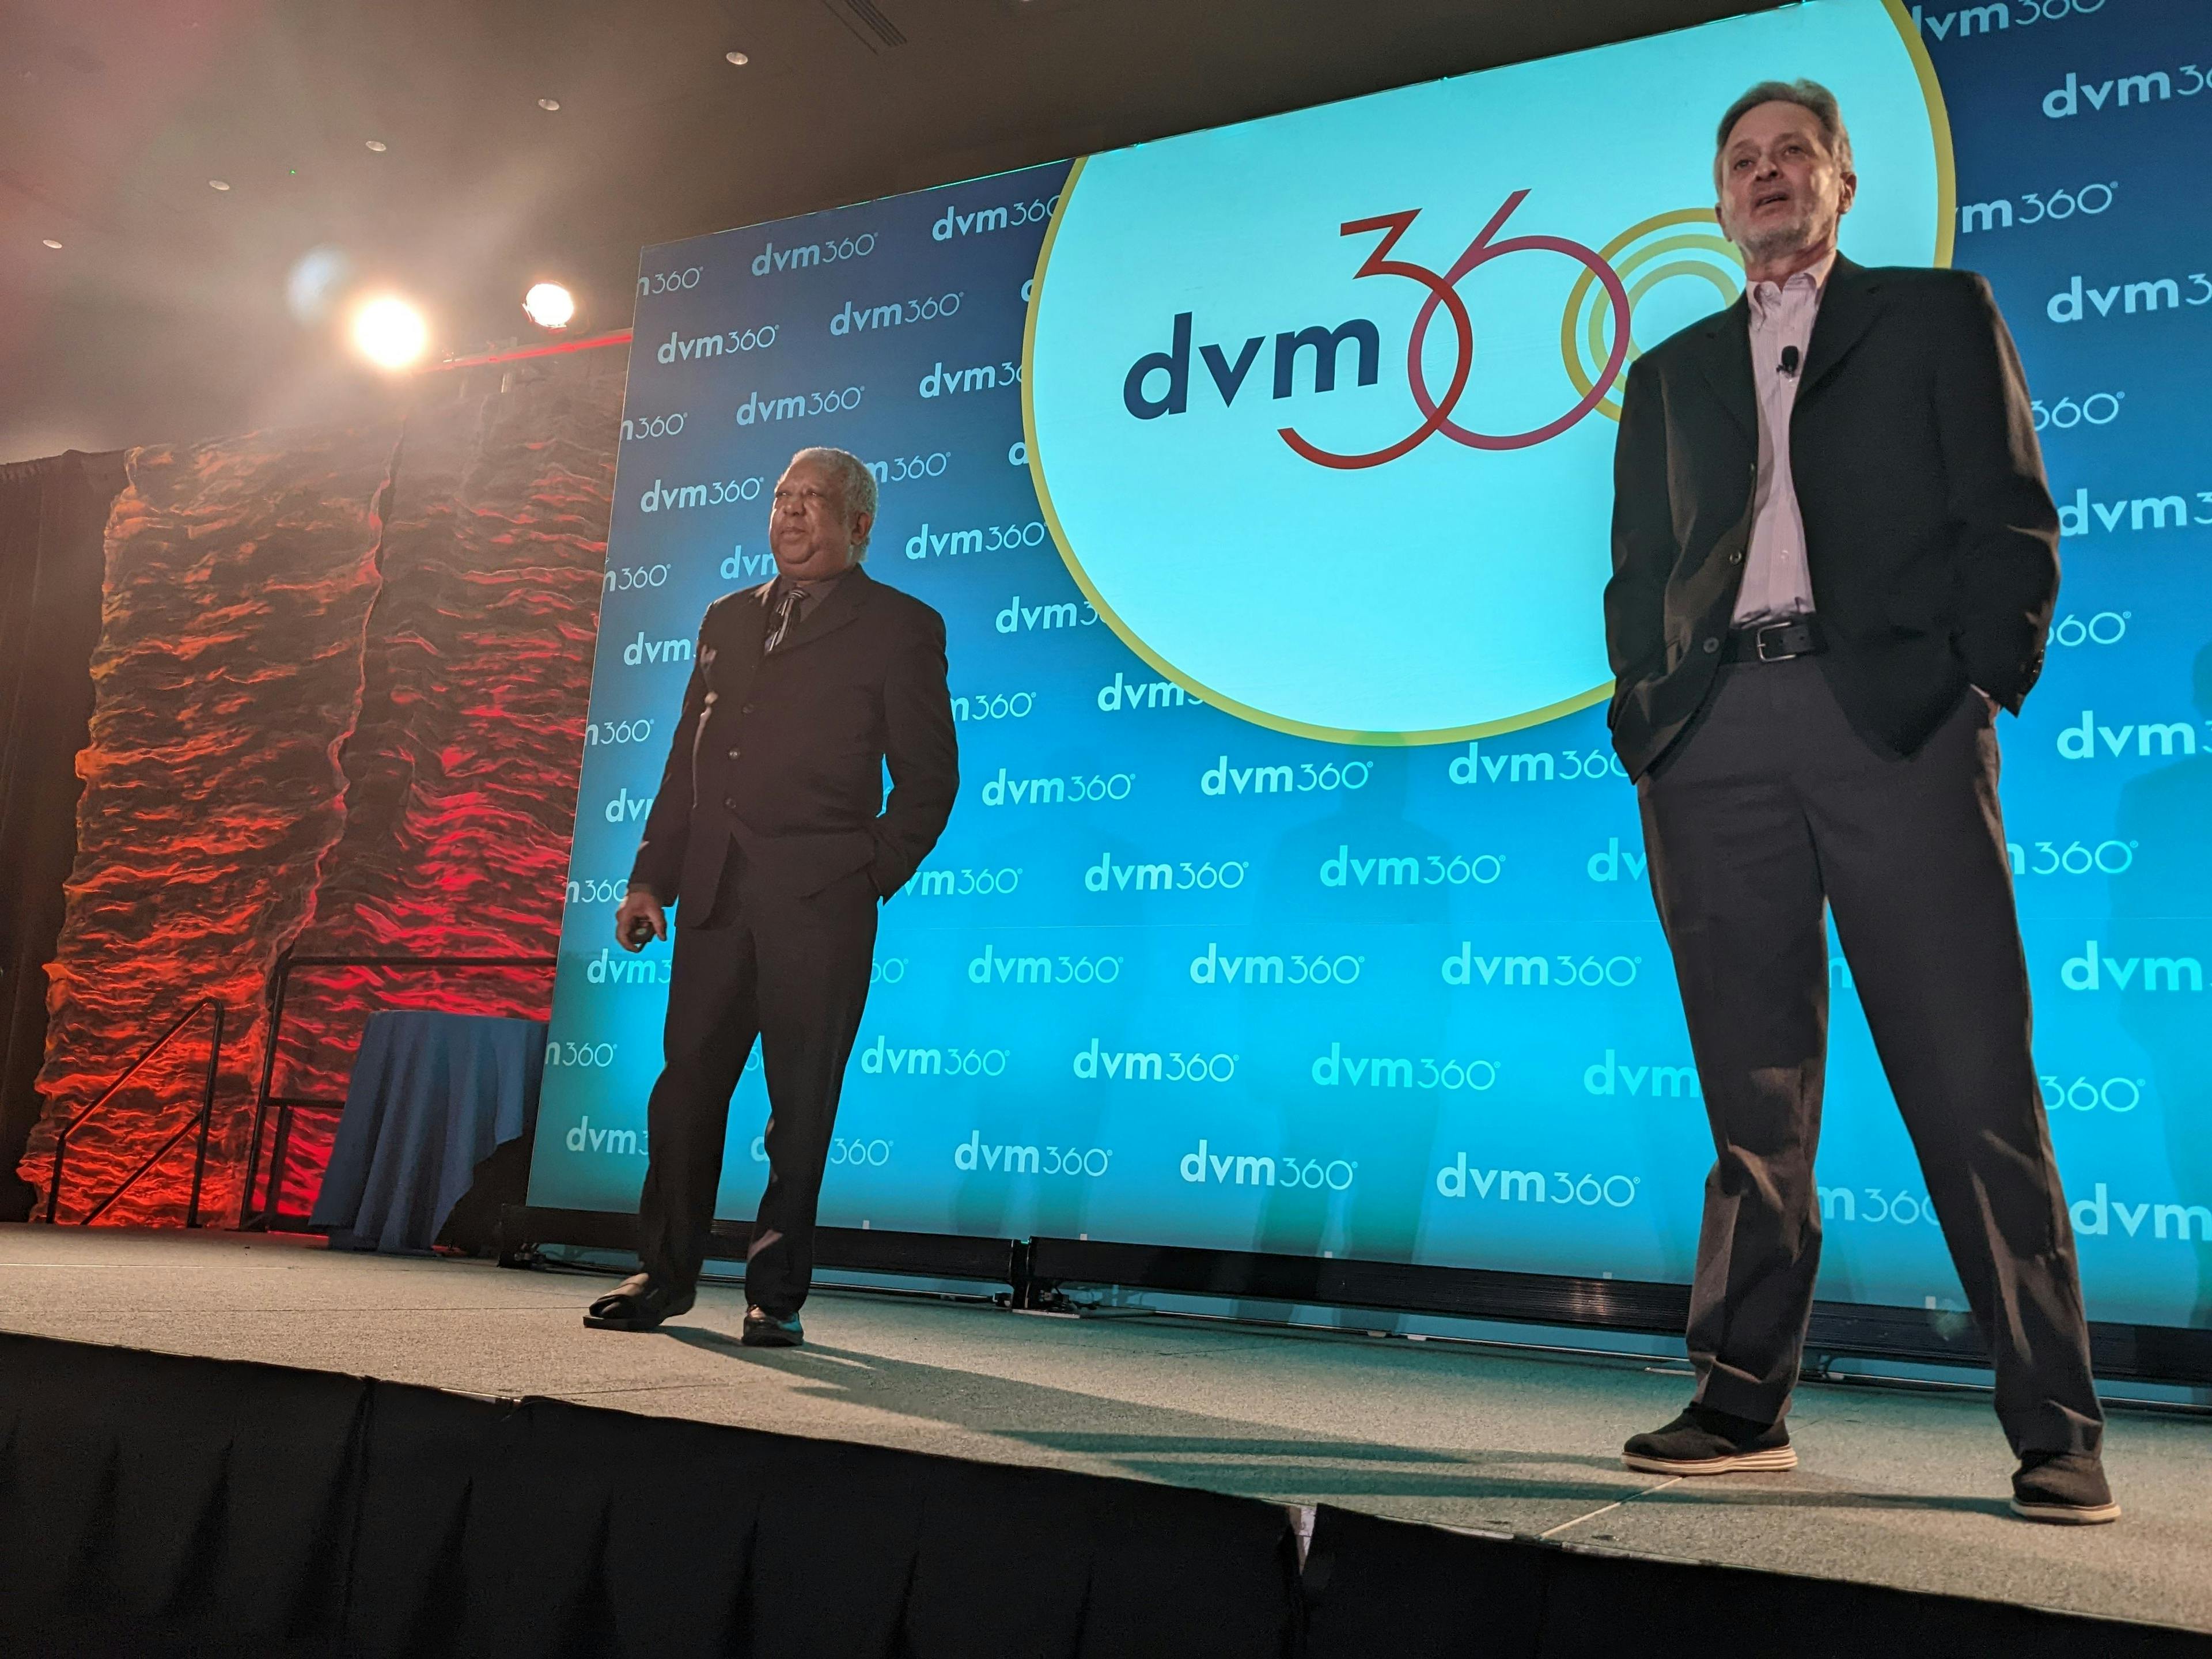 Keynote speakers Philip Nelson, PhD (left) and Peter Weinstein, DVM, MBA (right) address the audience during the keynote adress on Friday, September 22, 2022 at Fetch dvm360® Conference in San Diego, California.